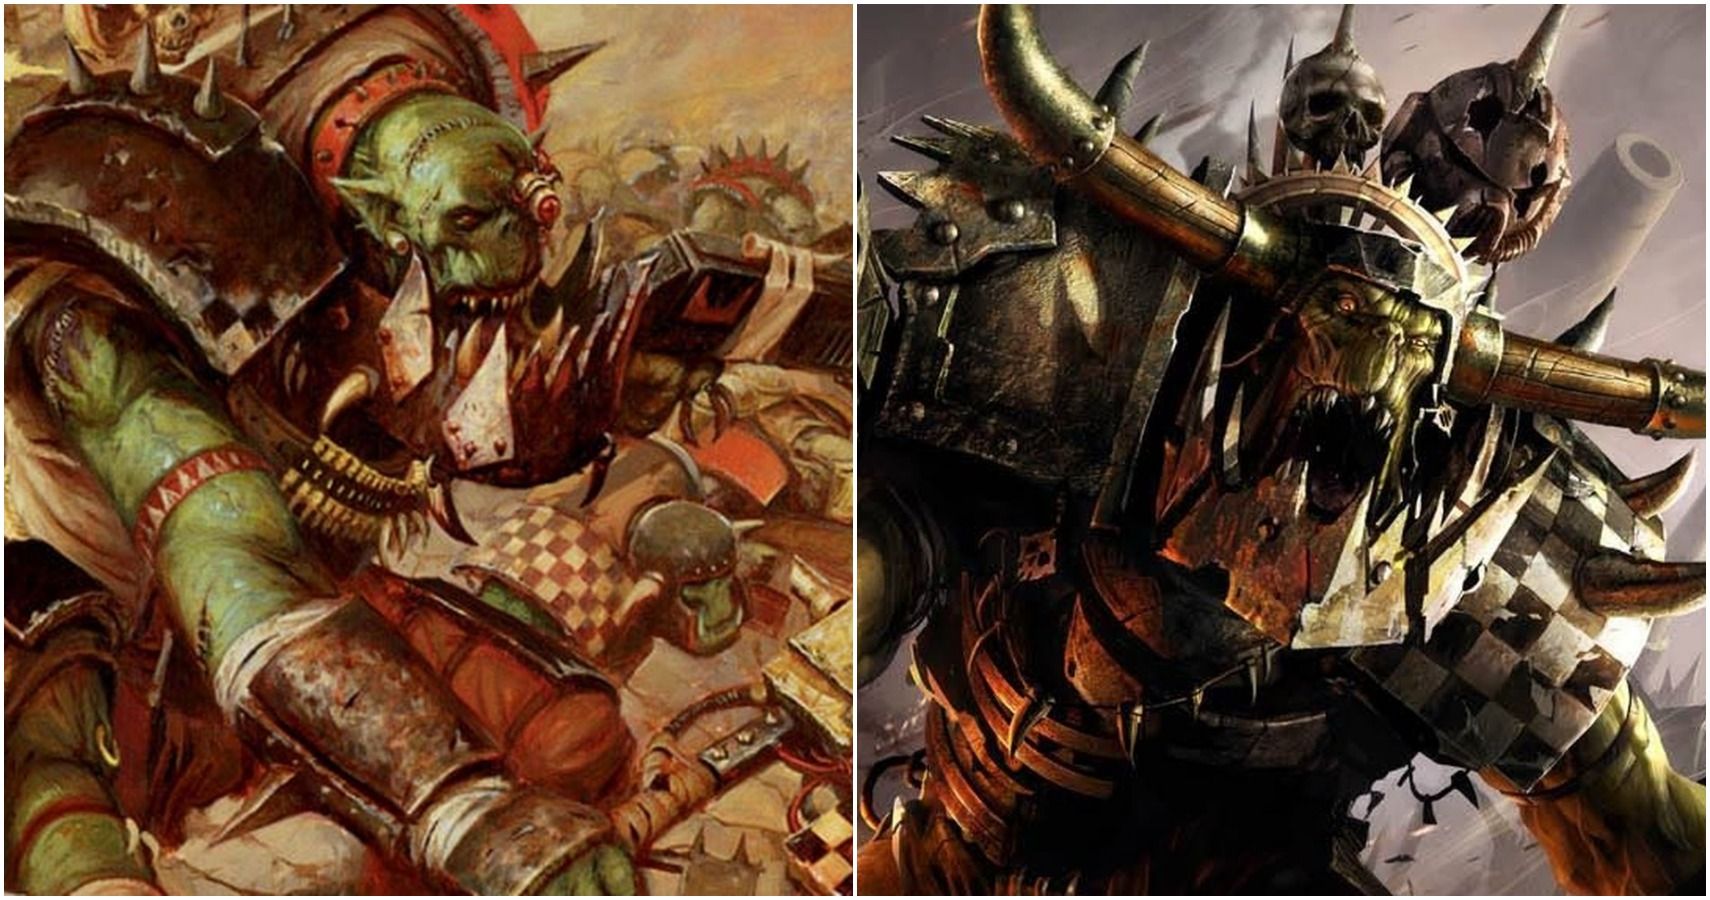 10 Things You Didn't Know About Orks In Warhammer 40,000